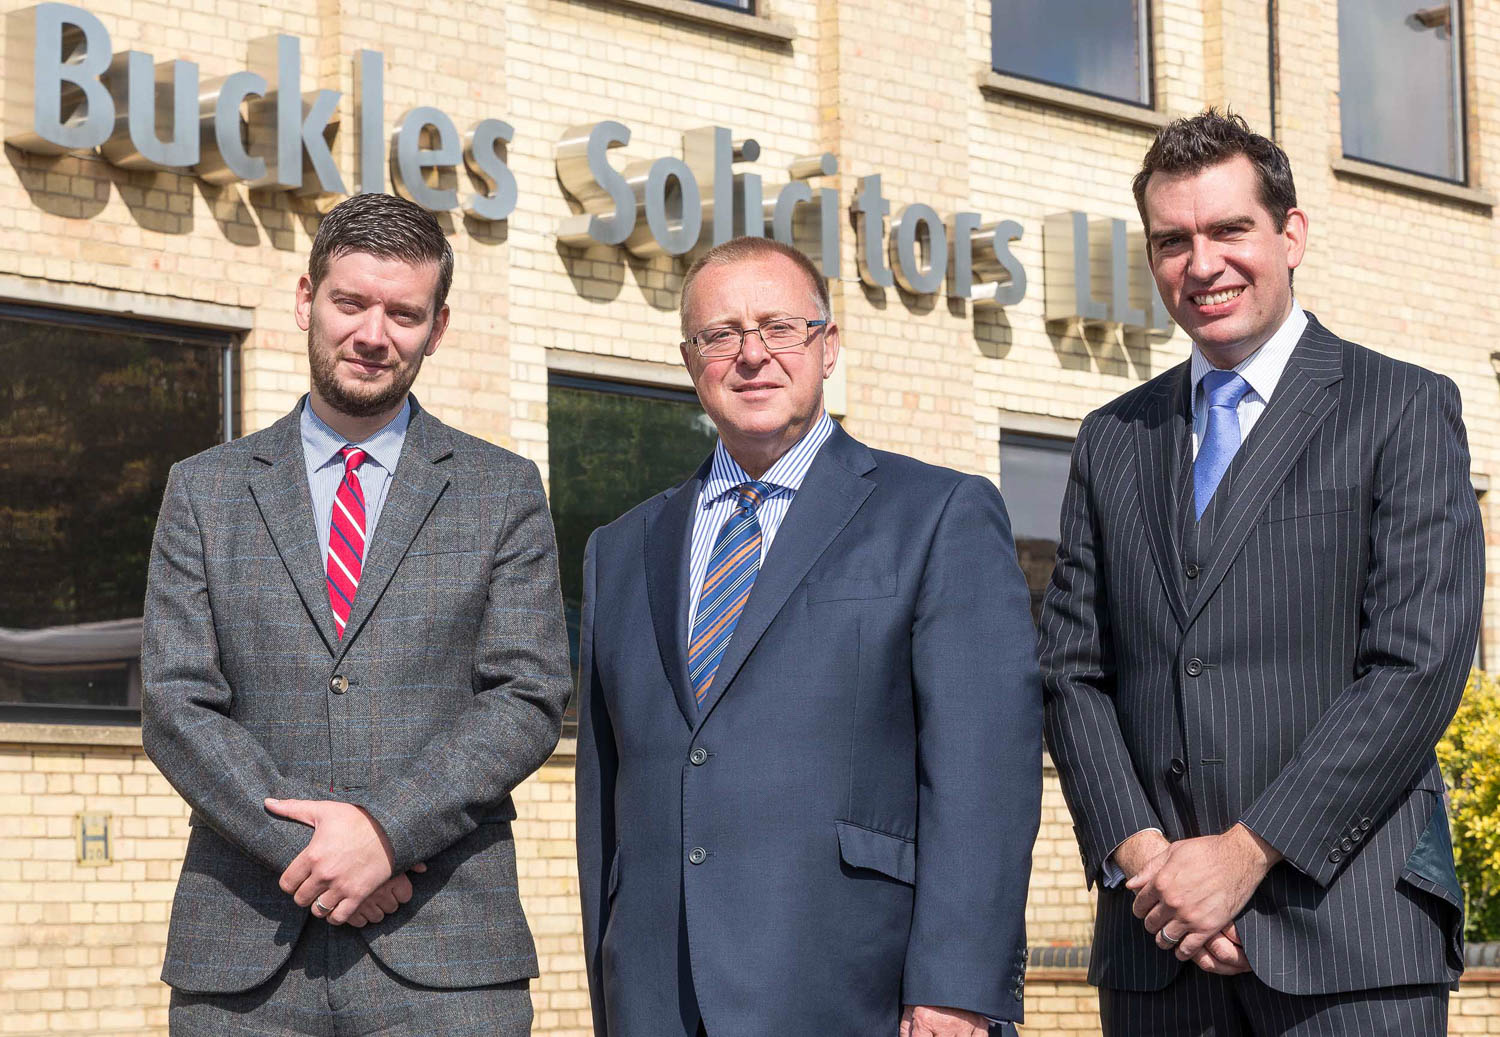 Buckles Solicitors Photo Shoot